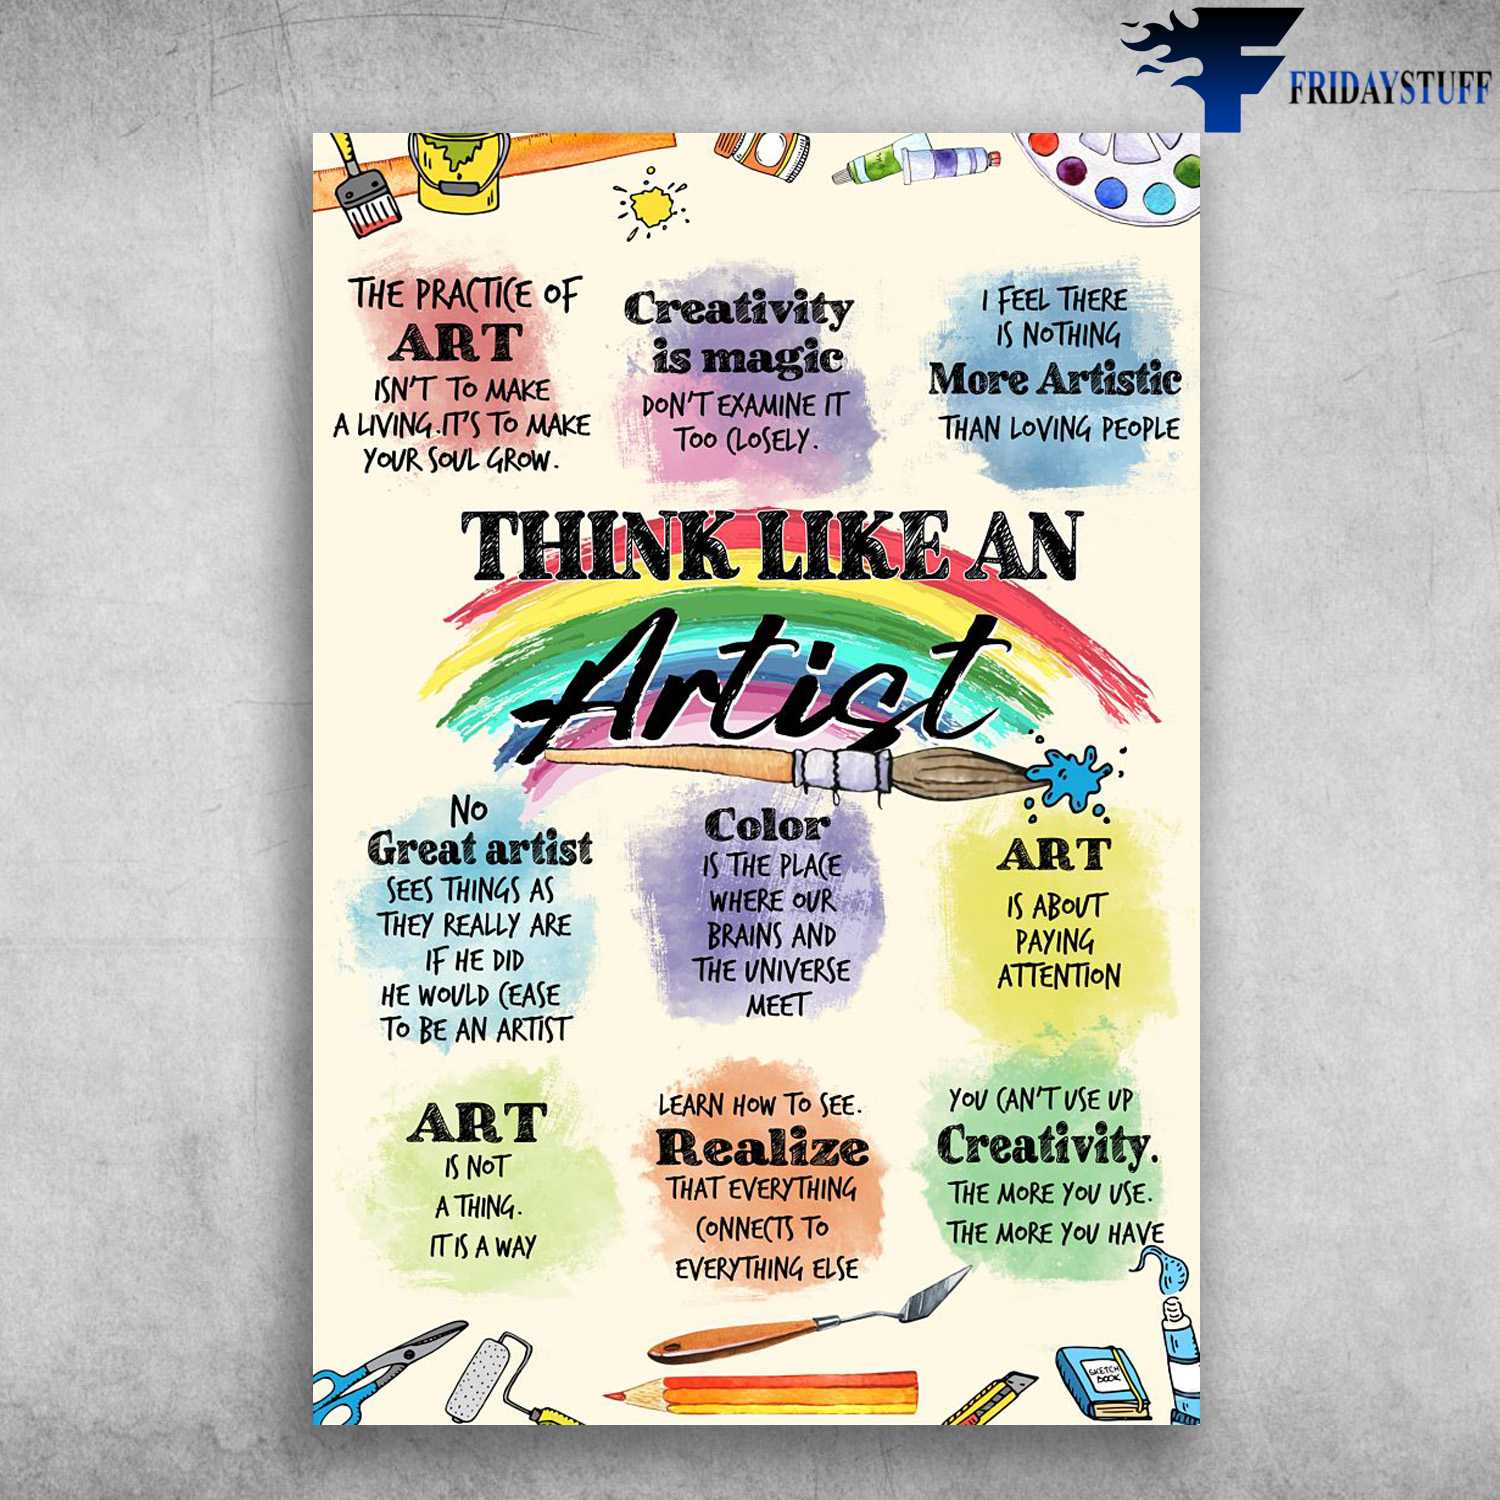 Think Like An Artist - The Practice Of Art Isn't To Make A Livig, It's To Make Your Soul Grow, Creativivity Is Magic, Don't Examine It Too Closely, I Feel There Is Nothing, More Artistic Than Loving People